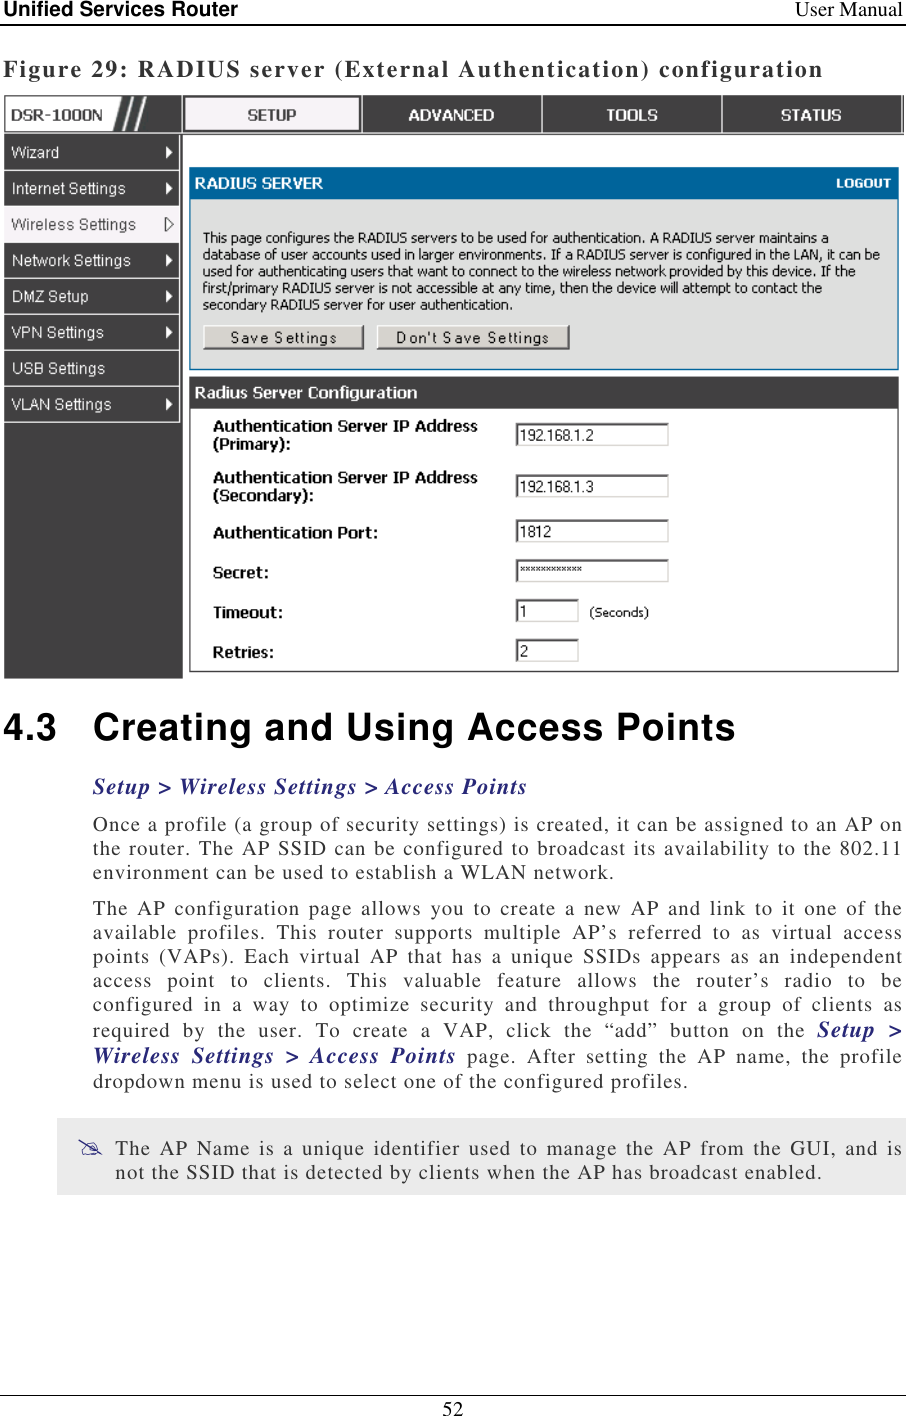 Unified Services Router    User Manual 52  Figure 29: RADIUS server (External Authentication) configuration  4.3  Creating and Using Access Points Setup &gt; Wireless Settings &gt; Access Points  Once a profile (a group of security settings) is created, it can be assigned to an AP on the router. The AP SSID can be configured to broadcast its availability to the 802.11 environment can be used to establish a WLAN network.  The  AP  configuration  page  allows  you  to  create  a  new  AP  and  link  to  it  one  of  the available  profiles.  This  router  supports  multiple  AP’s  referred  to  as  virtual  access points  (VAPs).  Each  virtual  AP  that  has  a  unique  SSIDs  appears  as  an  independent access  point  to  clients.  This  valuable  feature  allows  the  router’s  radio  to  be configured  in  a  way  to  optimize  security  and  throughput  for  a  group  of  clients  as required  by  the  user.  To  create  a  VAP,  click  the  “add”  button  on  the  Setup  &gt; Wireless  Settings  &gt;  Access  Points  page.  After  setting  the  AP  name,  the  profile dropdown menu is used to select one of the configured profiles.   The  AP  Name  is  a  unique identifier  used  to  manage  the  AP  from the  GUI,  and  is not the SSID that is detected by clients when the AP has broadcast enabled.  